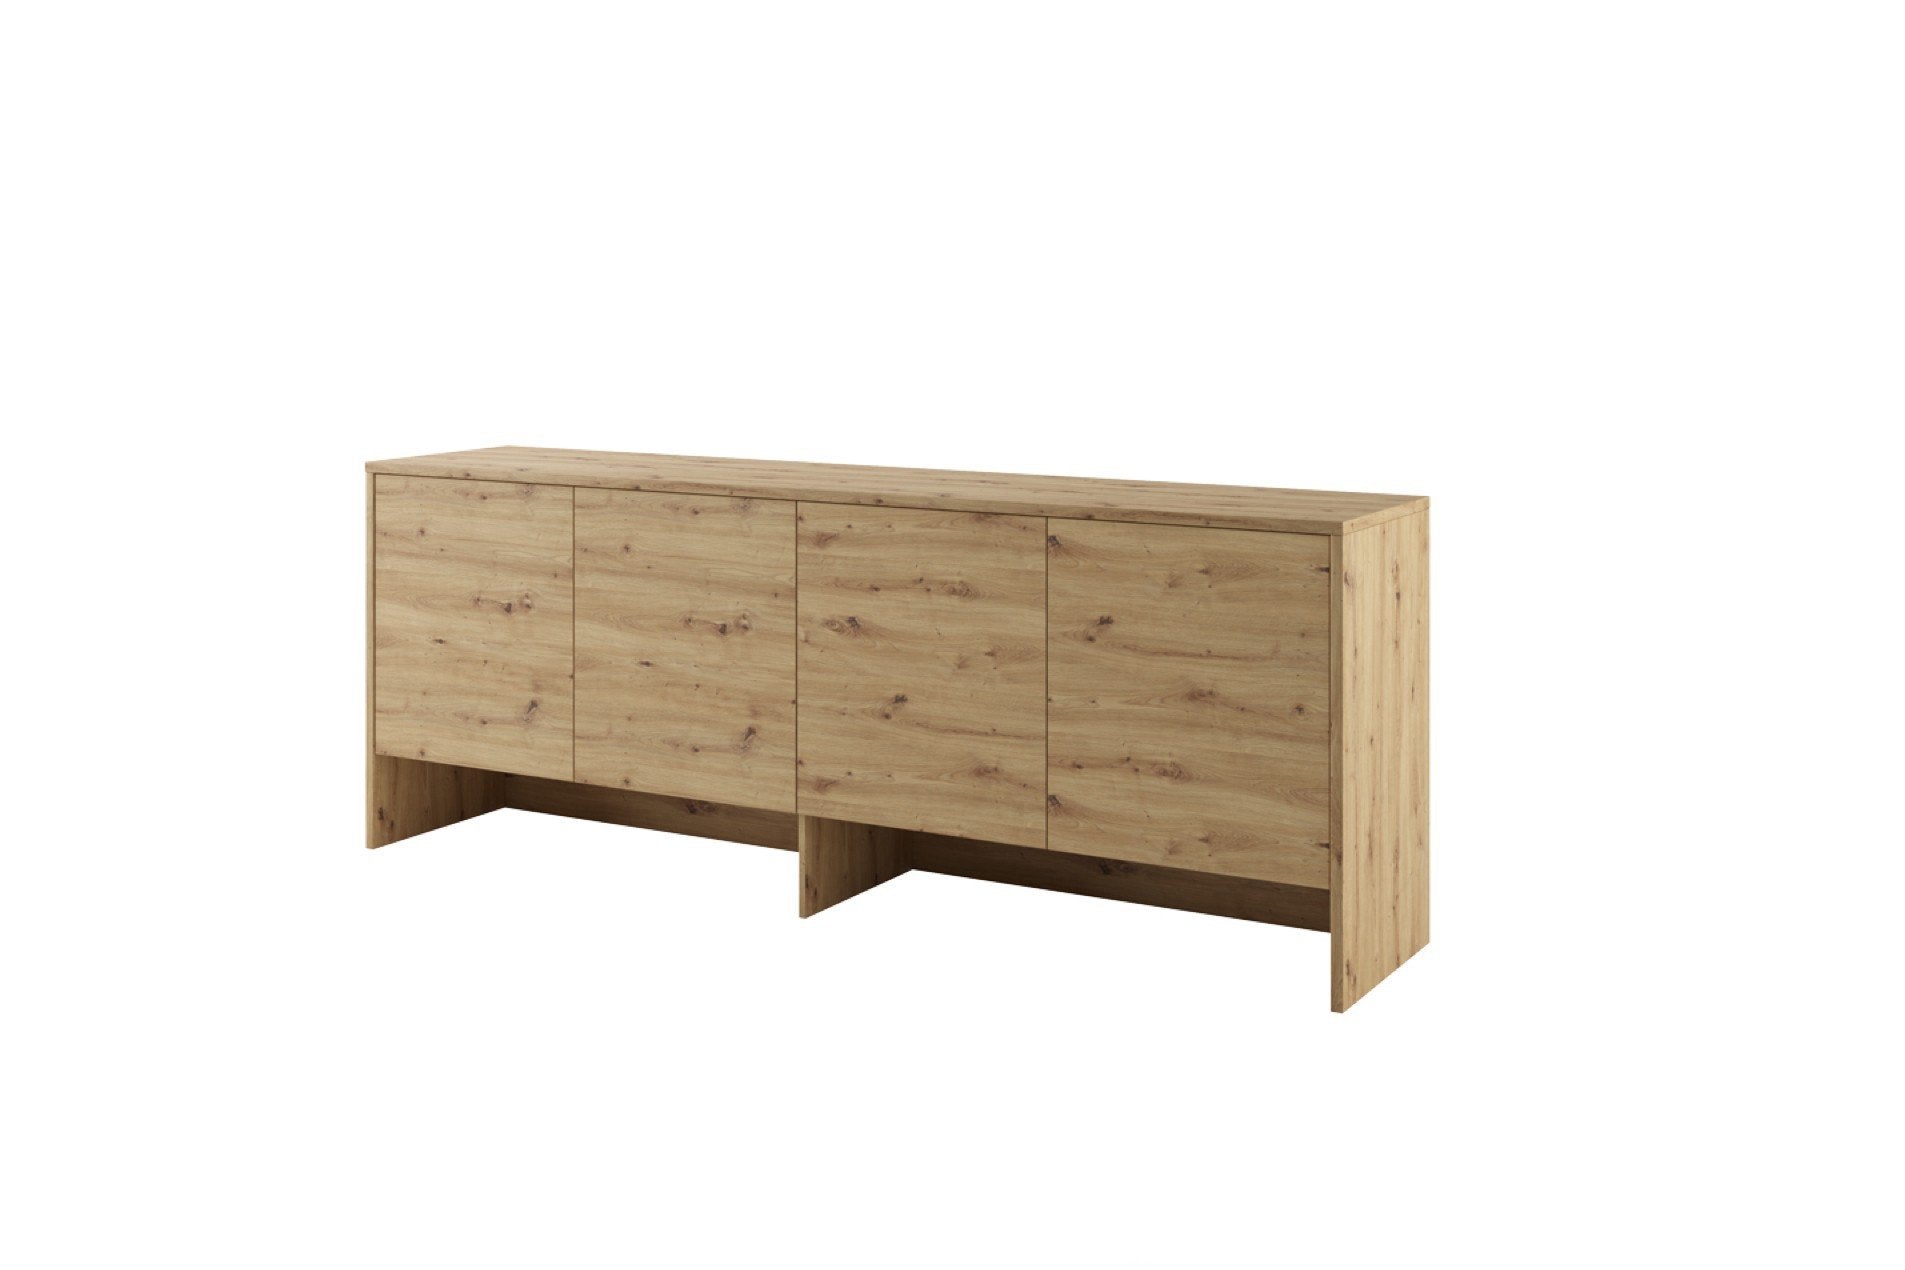 BC-10 Over Bed Unit for Horizontal Wall Bed Concept 120cm Oak Artisan Wall Bed with Storage Unit 